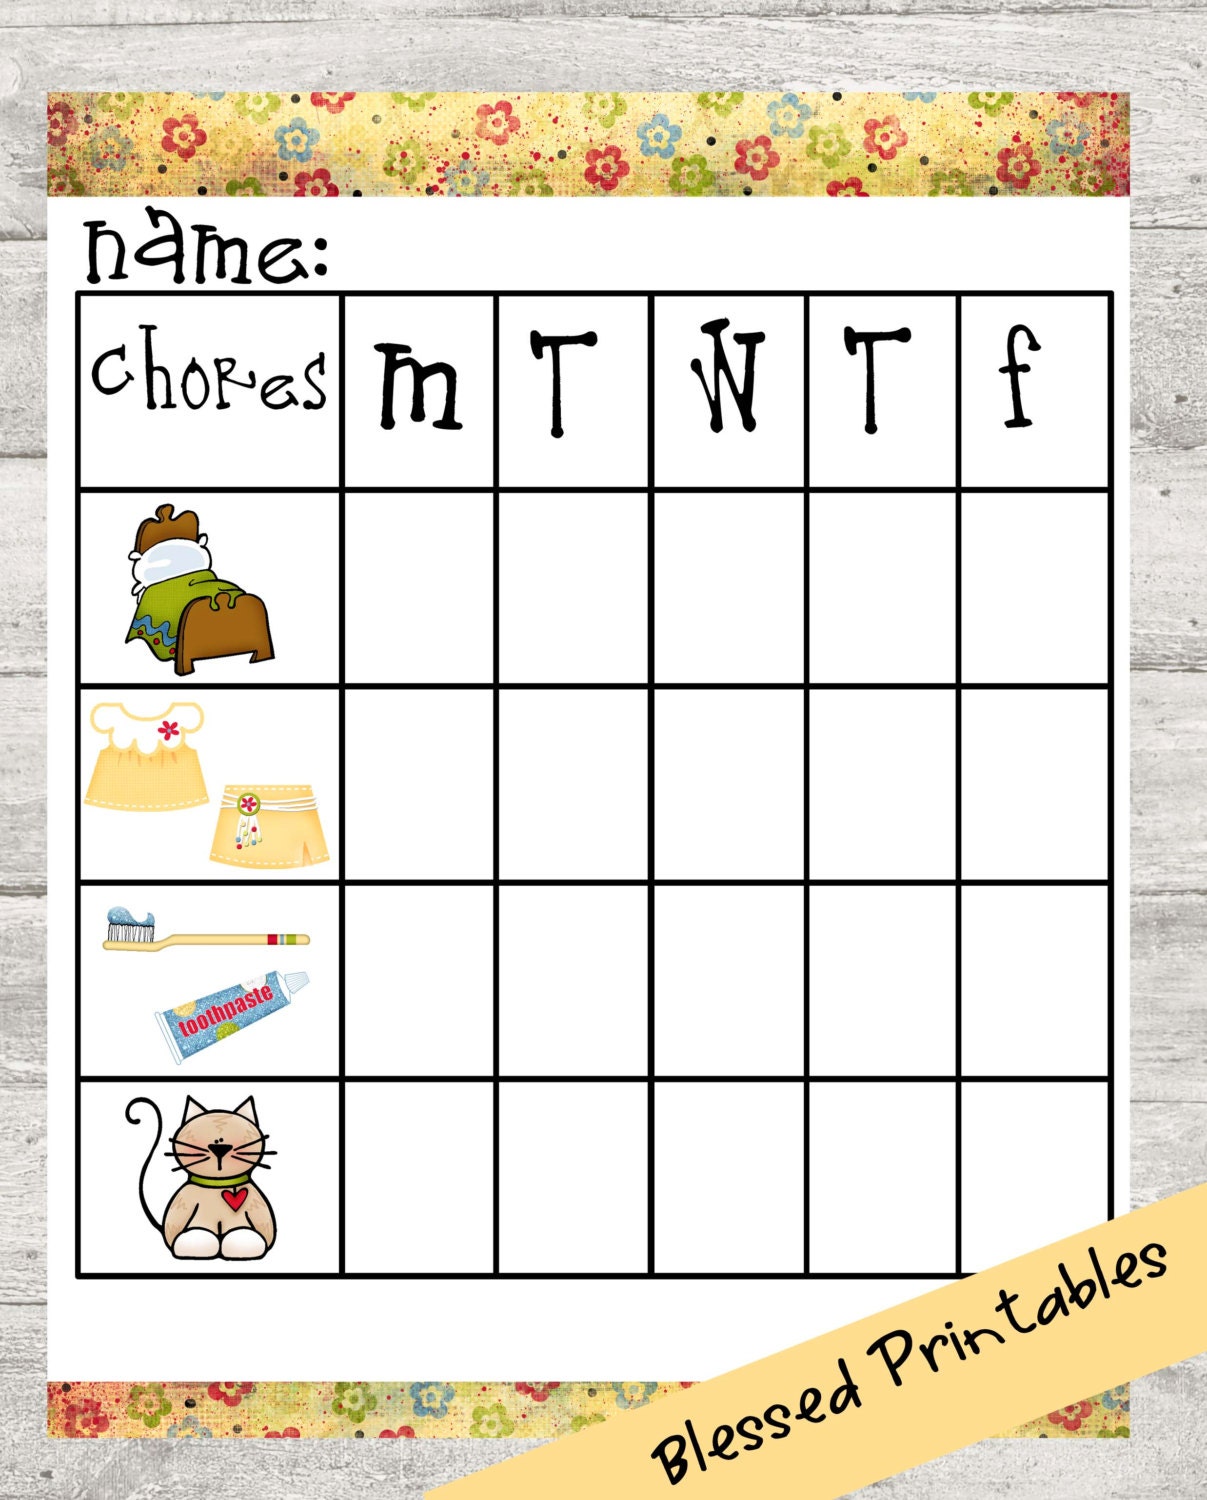 Toddler Chore Chart Printable by SoBlessedDigitals on Etsy